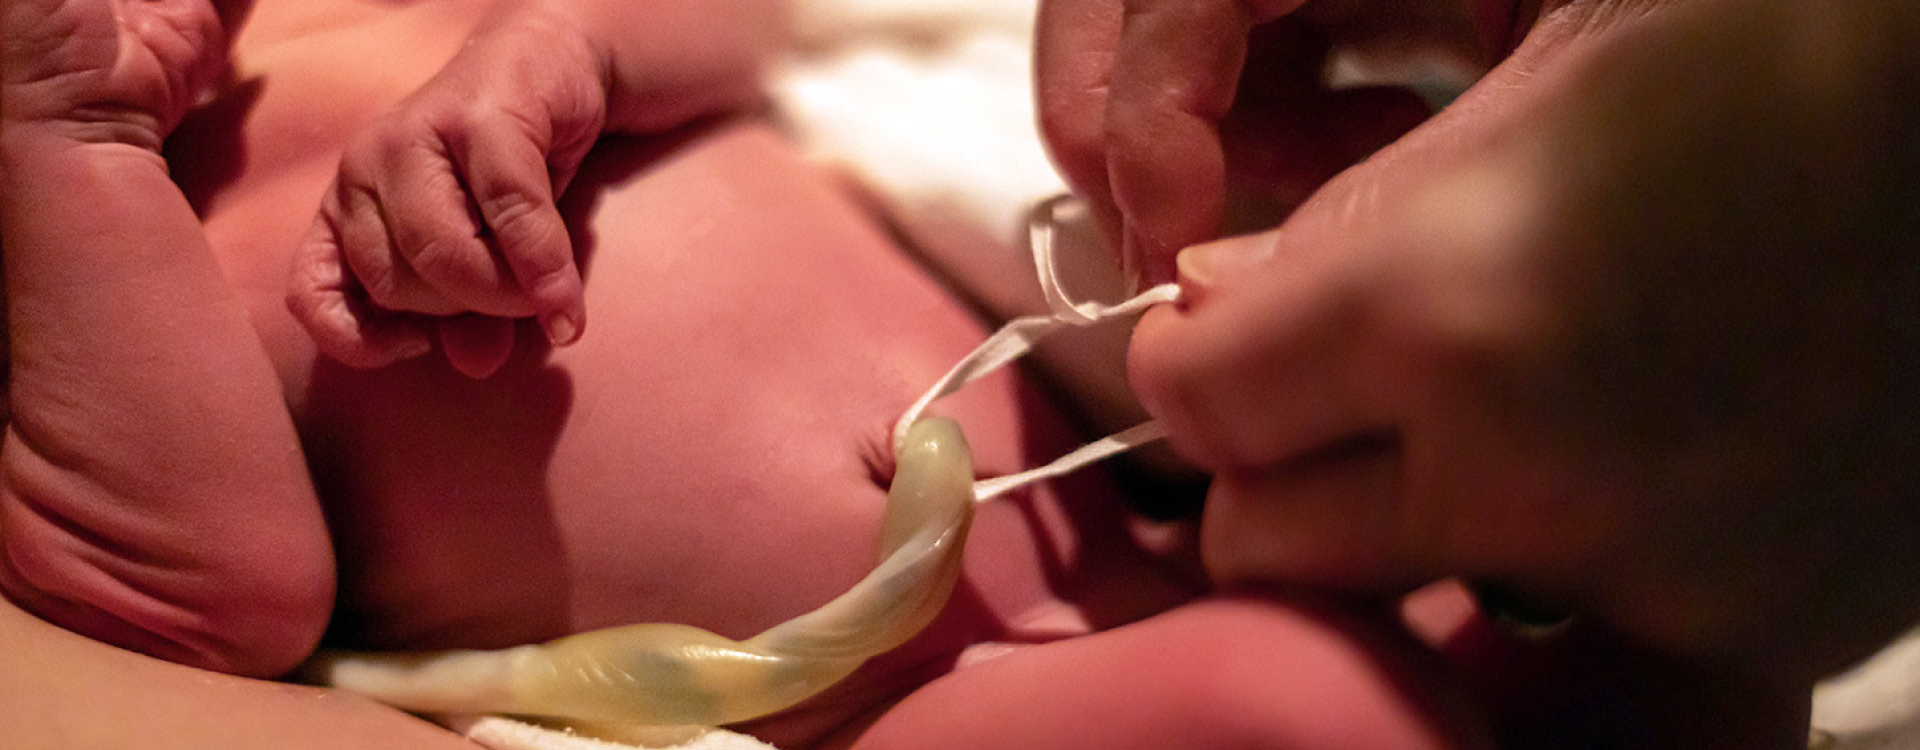 Cutting Of The Umbilical Cord Stock Photo - Download Image Now